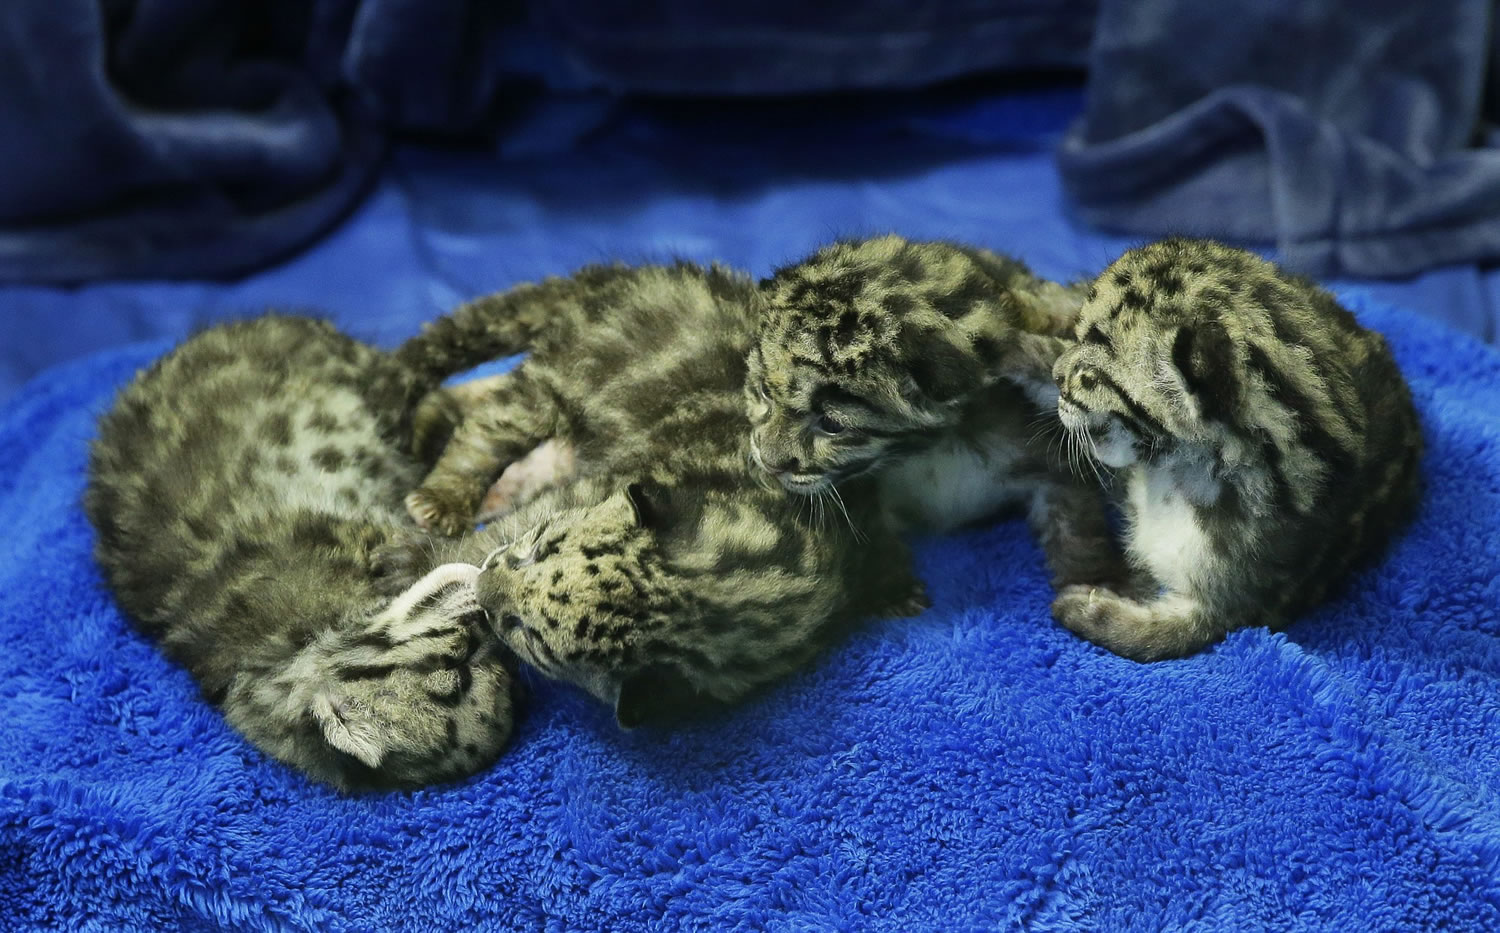 Four clouded leopard cubs, some nearly asleep after a feeding, gather together at the Point Defiance Zoo &amp; Aquarium, Friday in Tacoma. The quadruplets were born on May 12 and now weigh about 1.7 lbs. each.